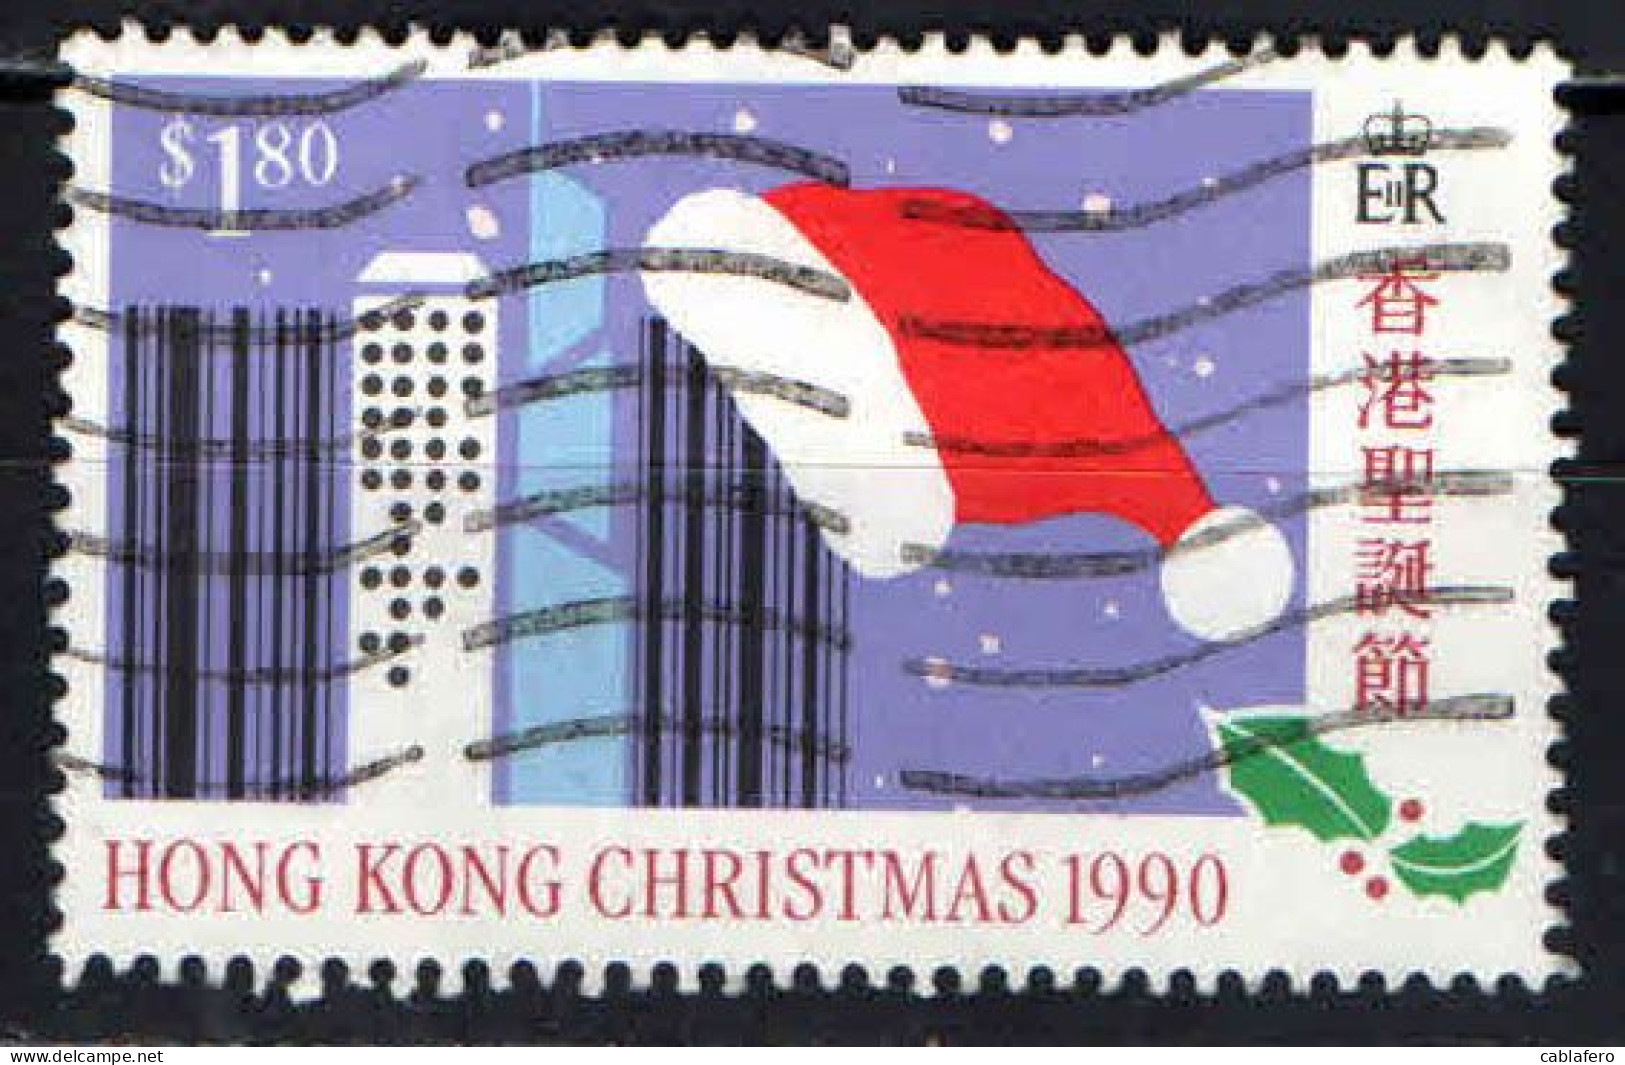 HONG KONG - 1990 - IL CAPPELLO DI BABBO NATALE - USATO - Used Stamps